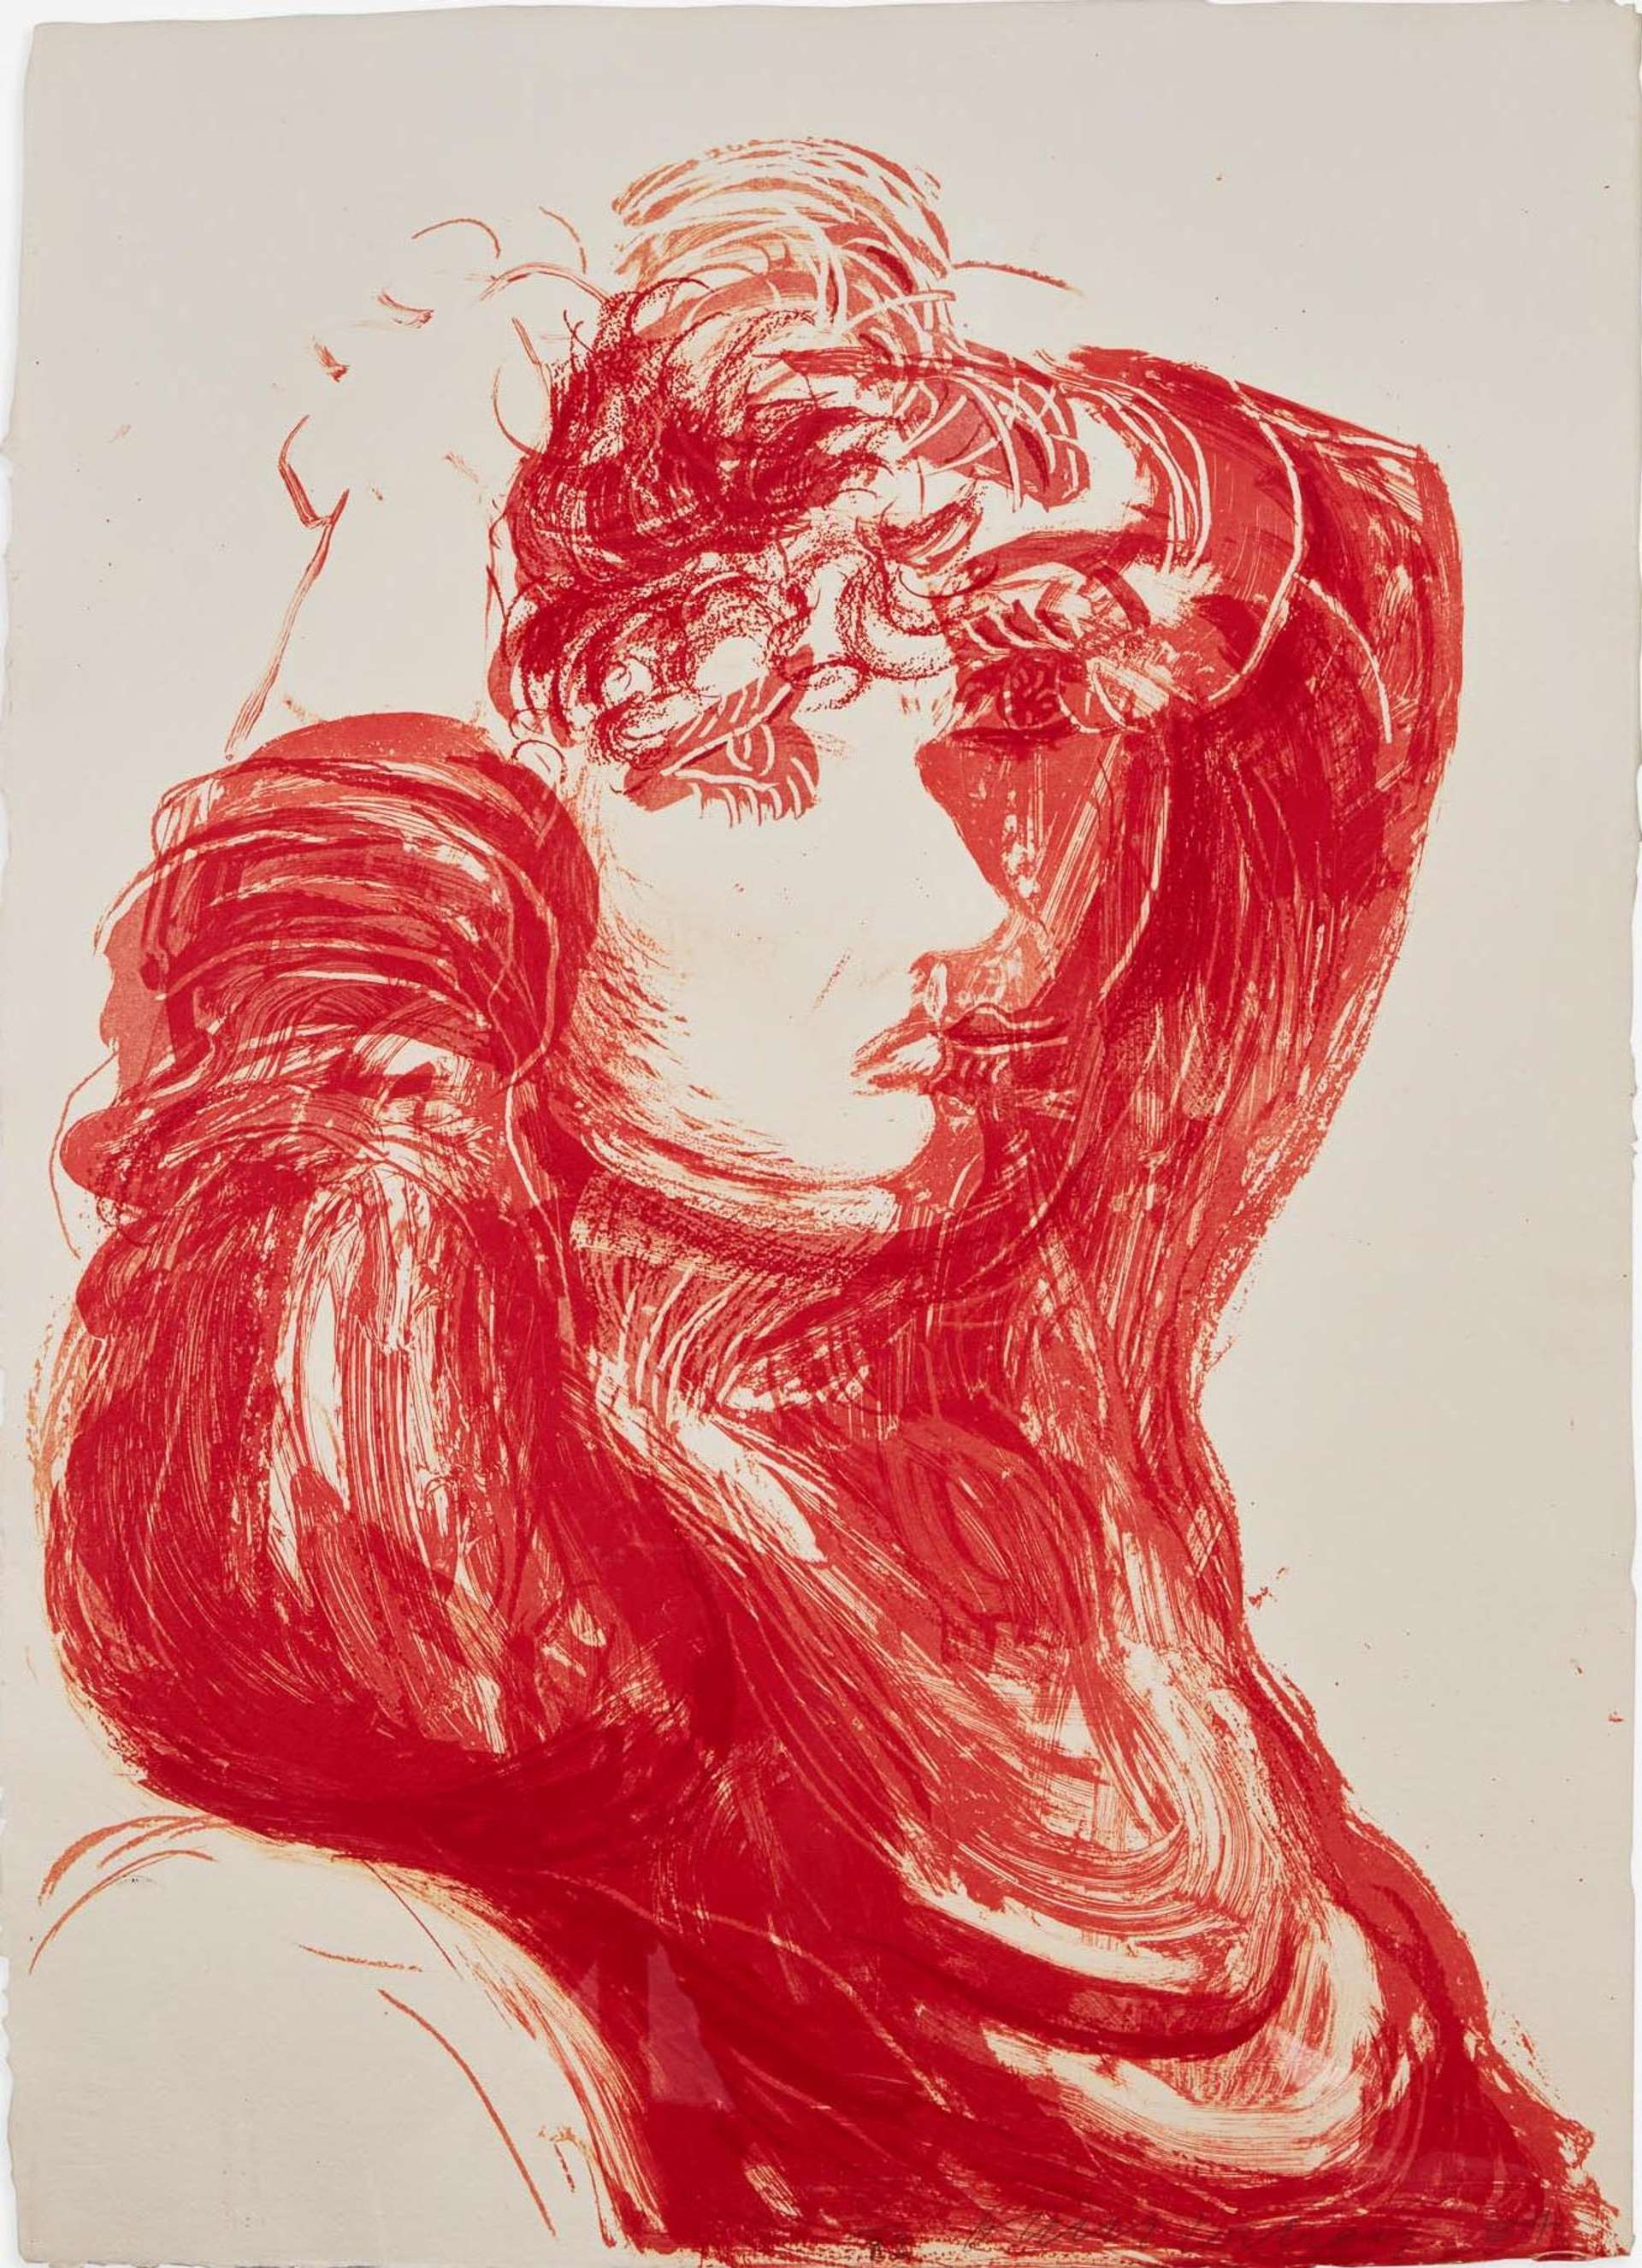 A woman sitting upright, with her hands behind her head. Painted in vivid red.